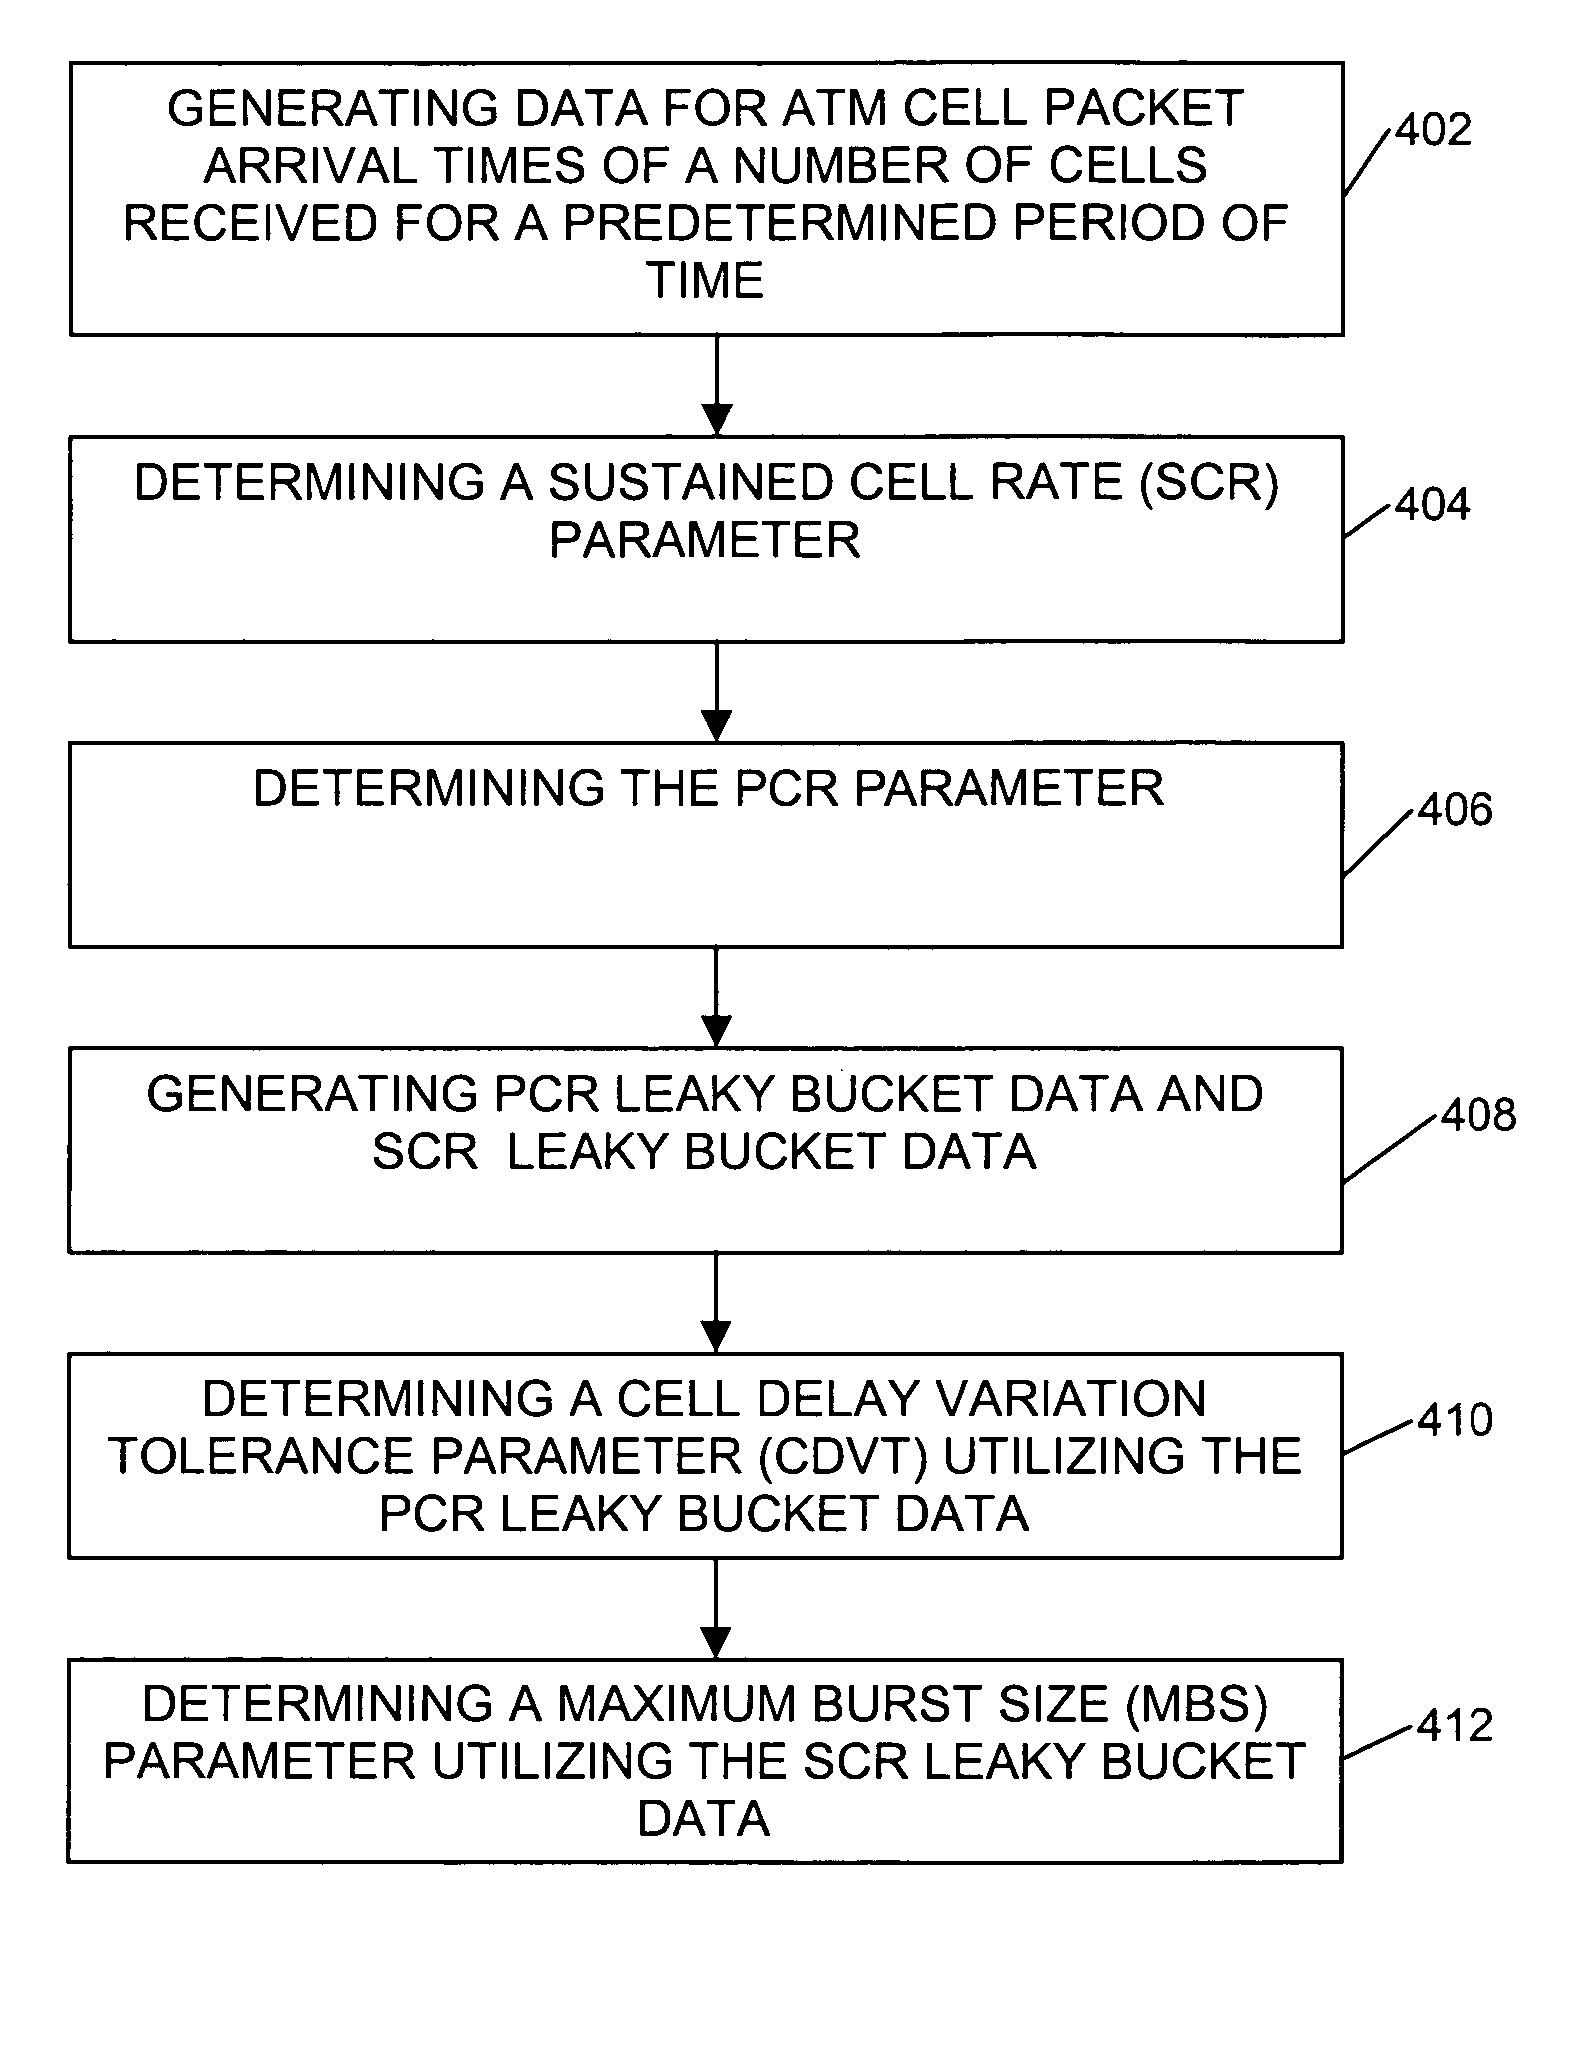 Traffic contract parameter estimation in an ATM network